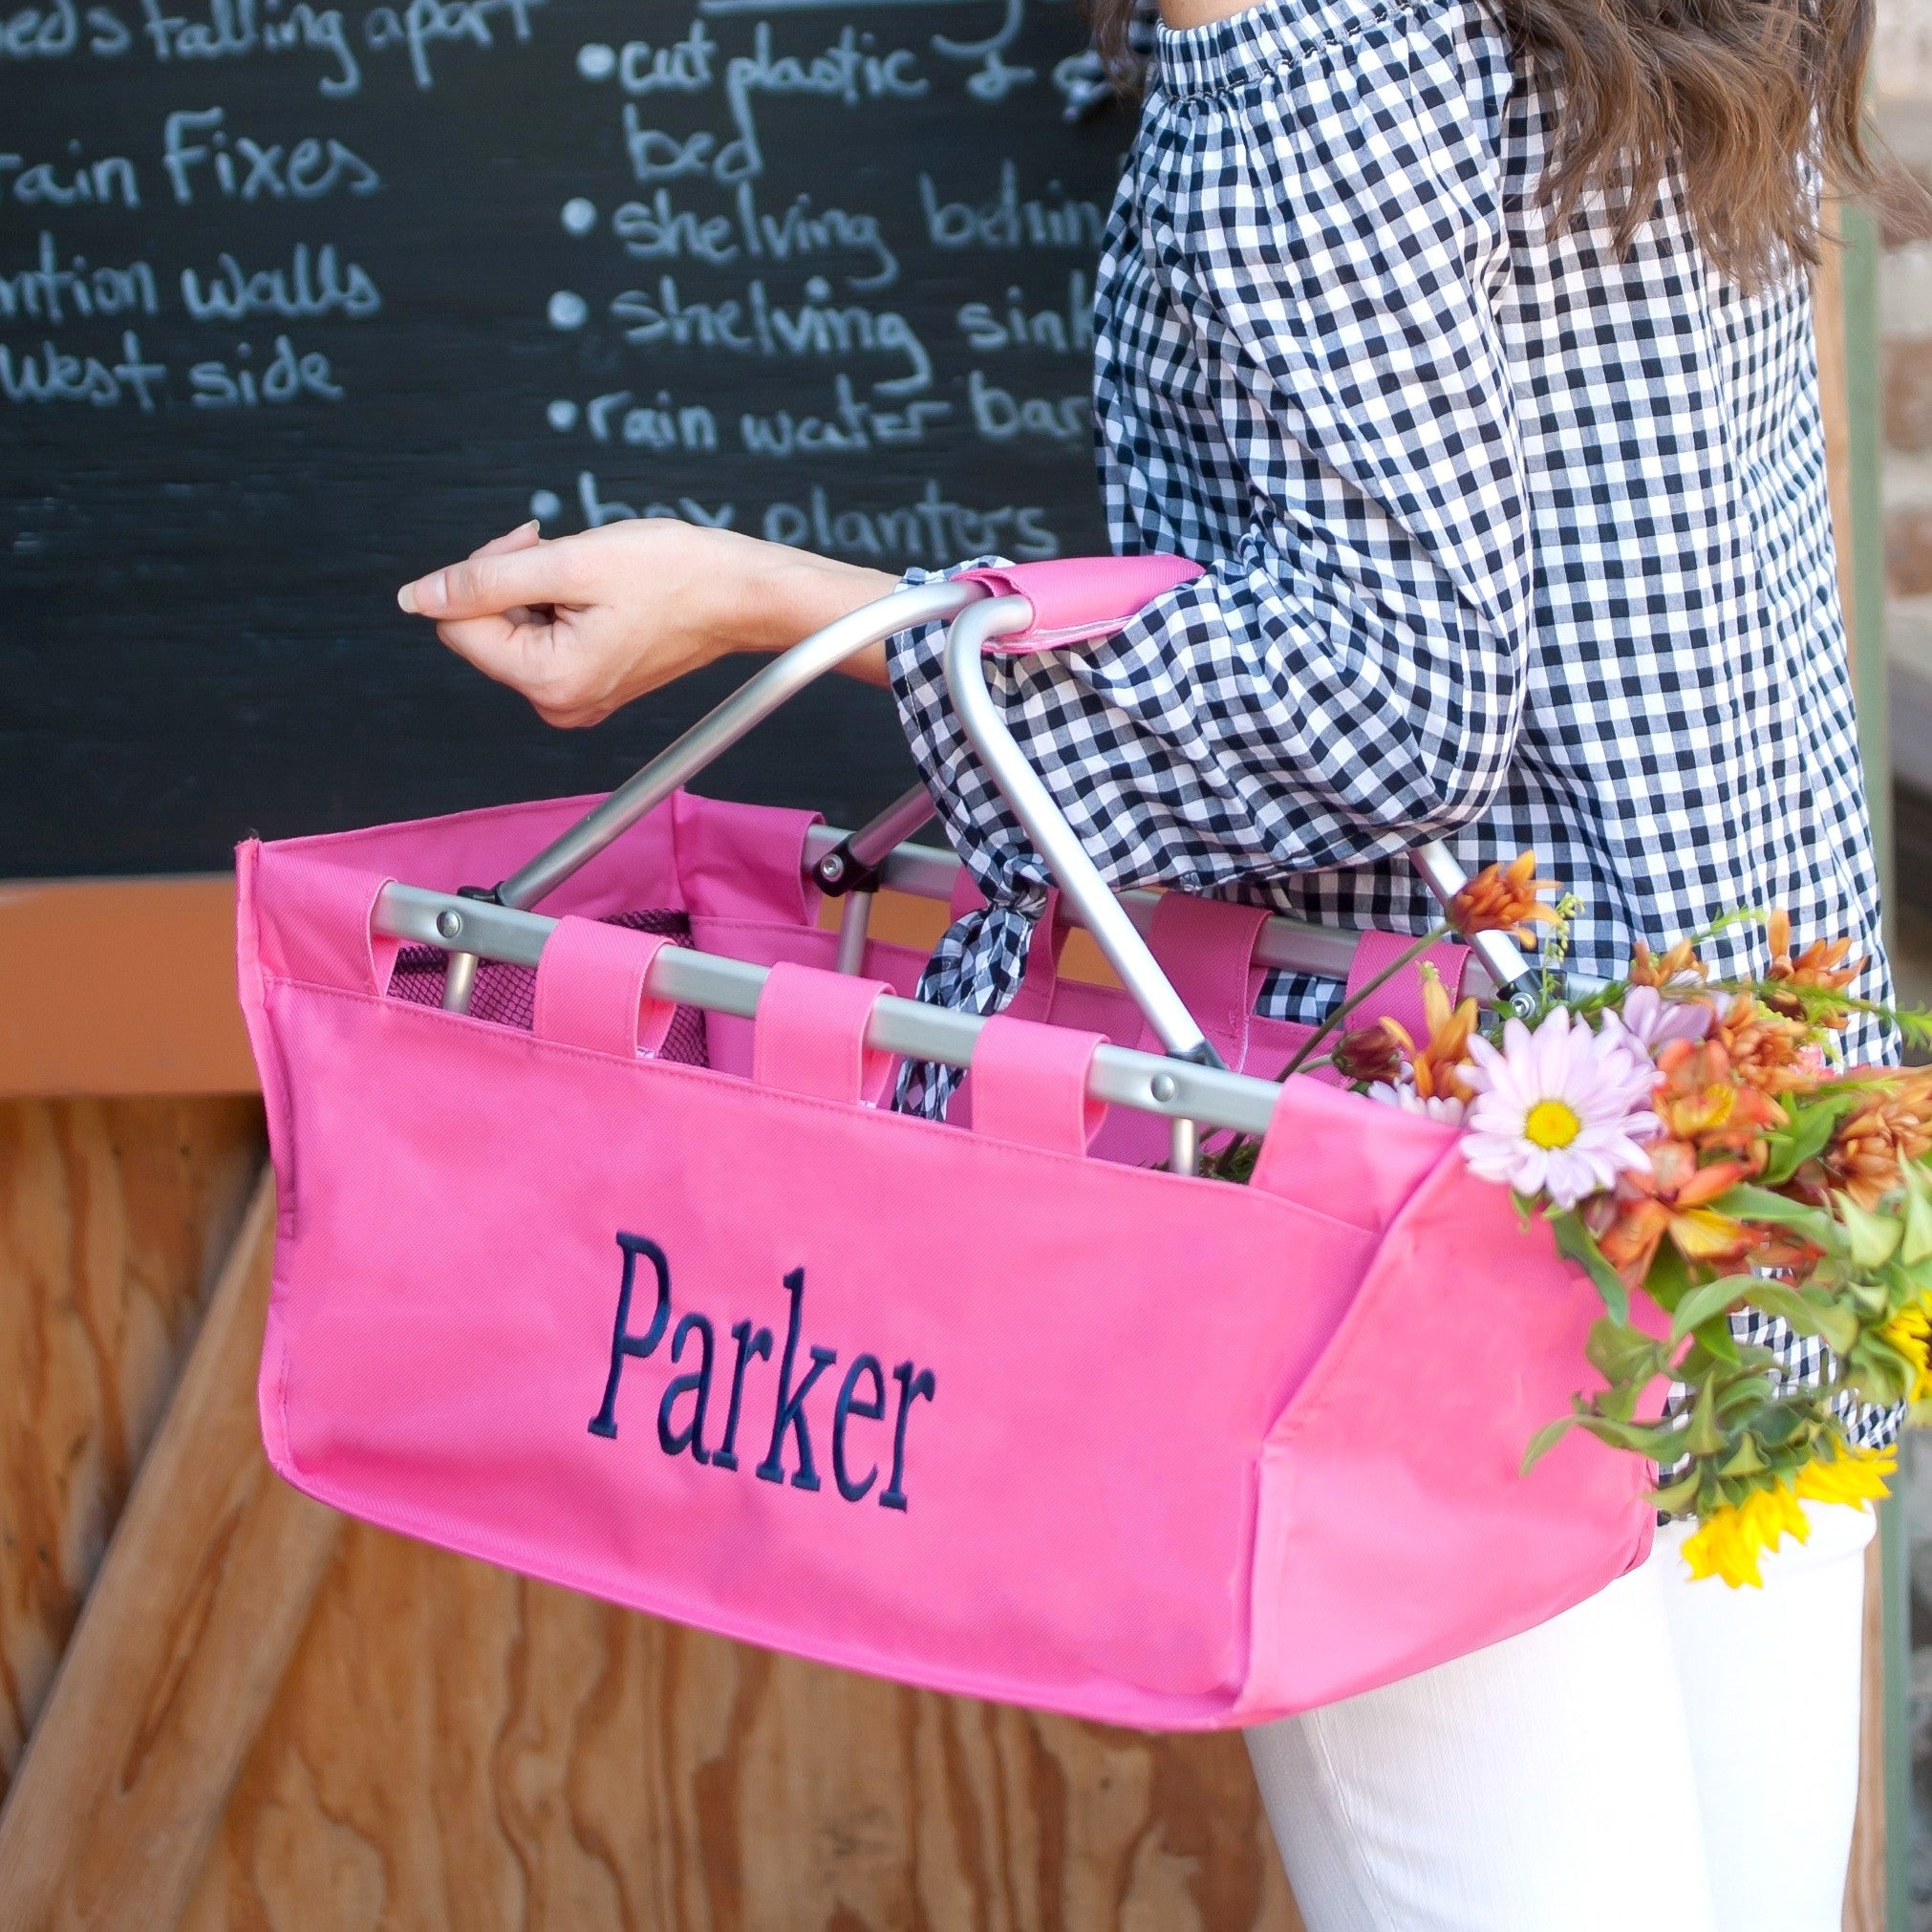 Hot Pink Market Tote - Generously sized for the perfect Carry All Tote!